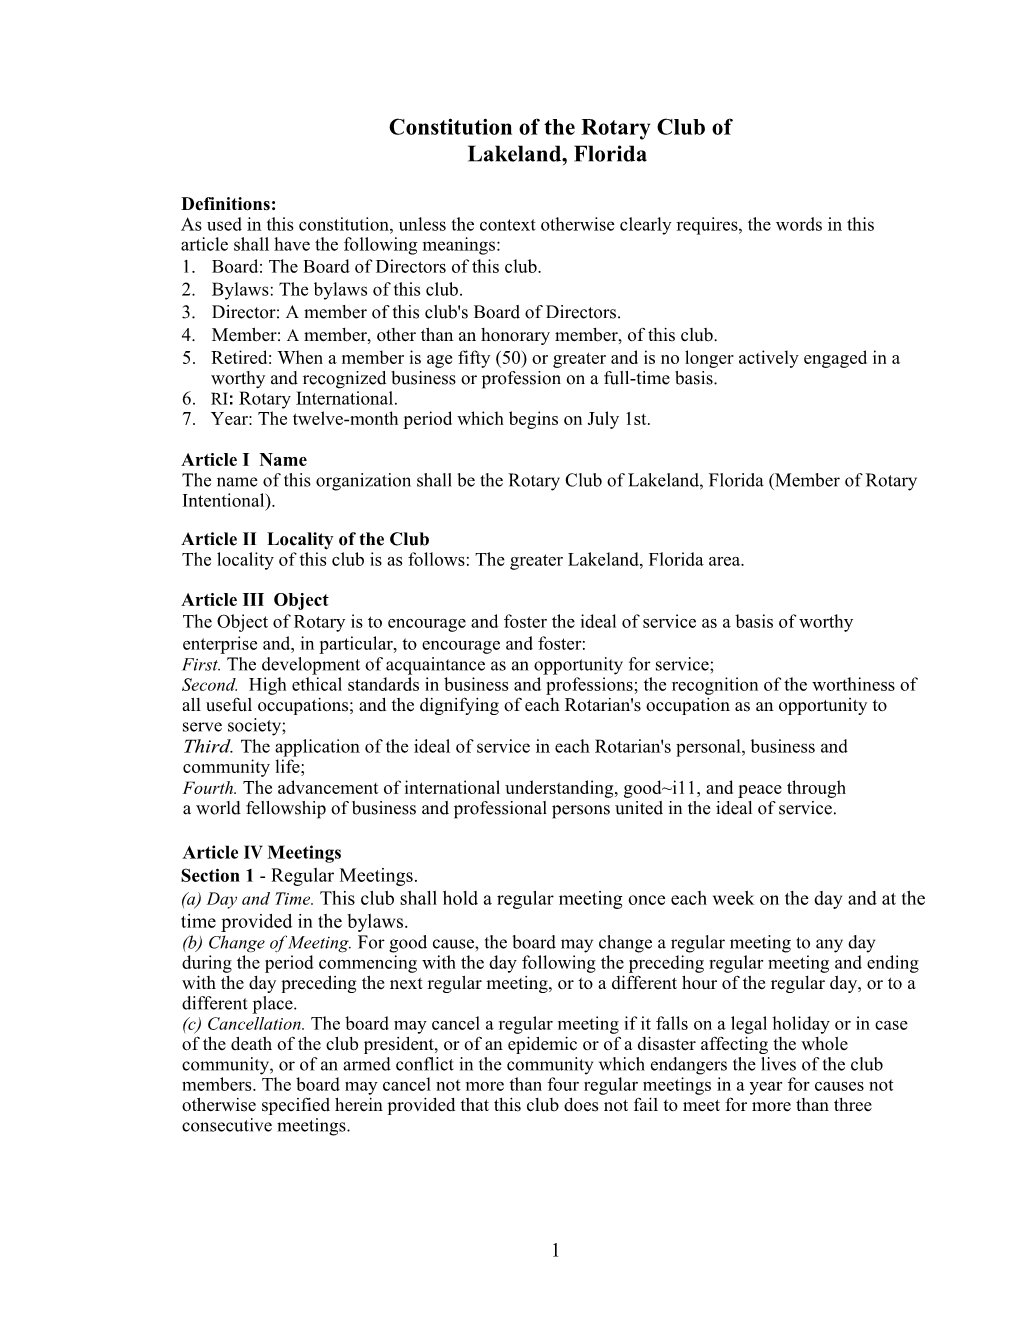 Constitution of the Rotary Club of Lakeland, Florida